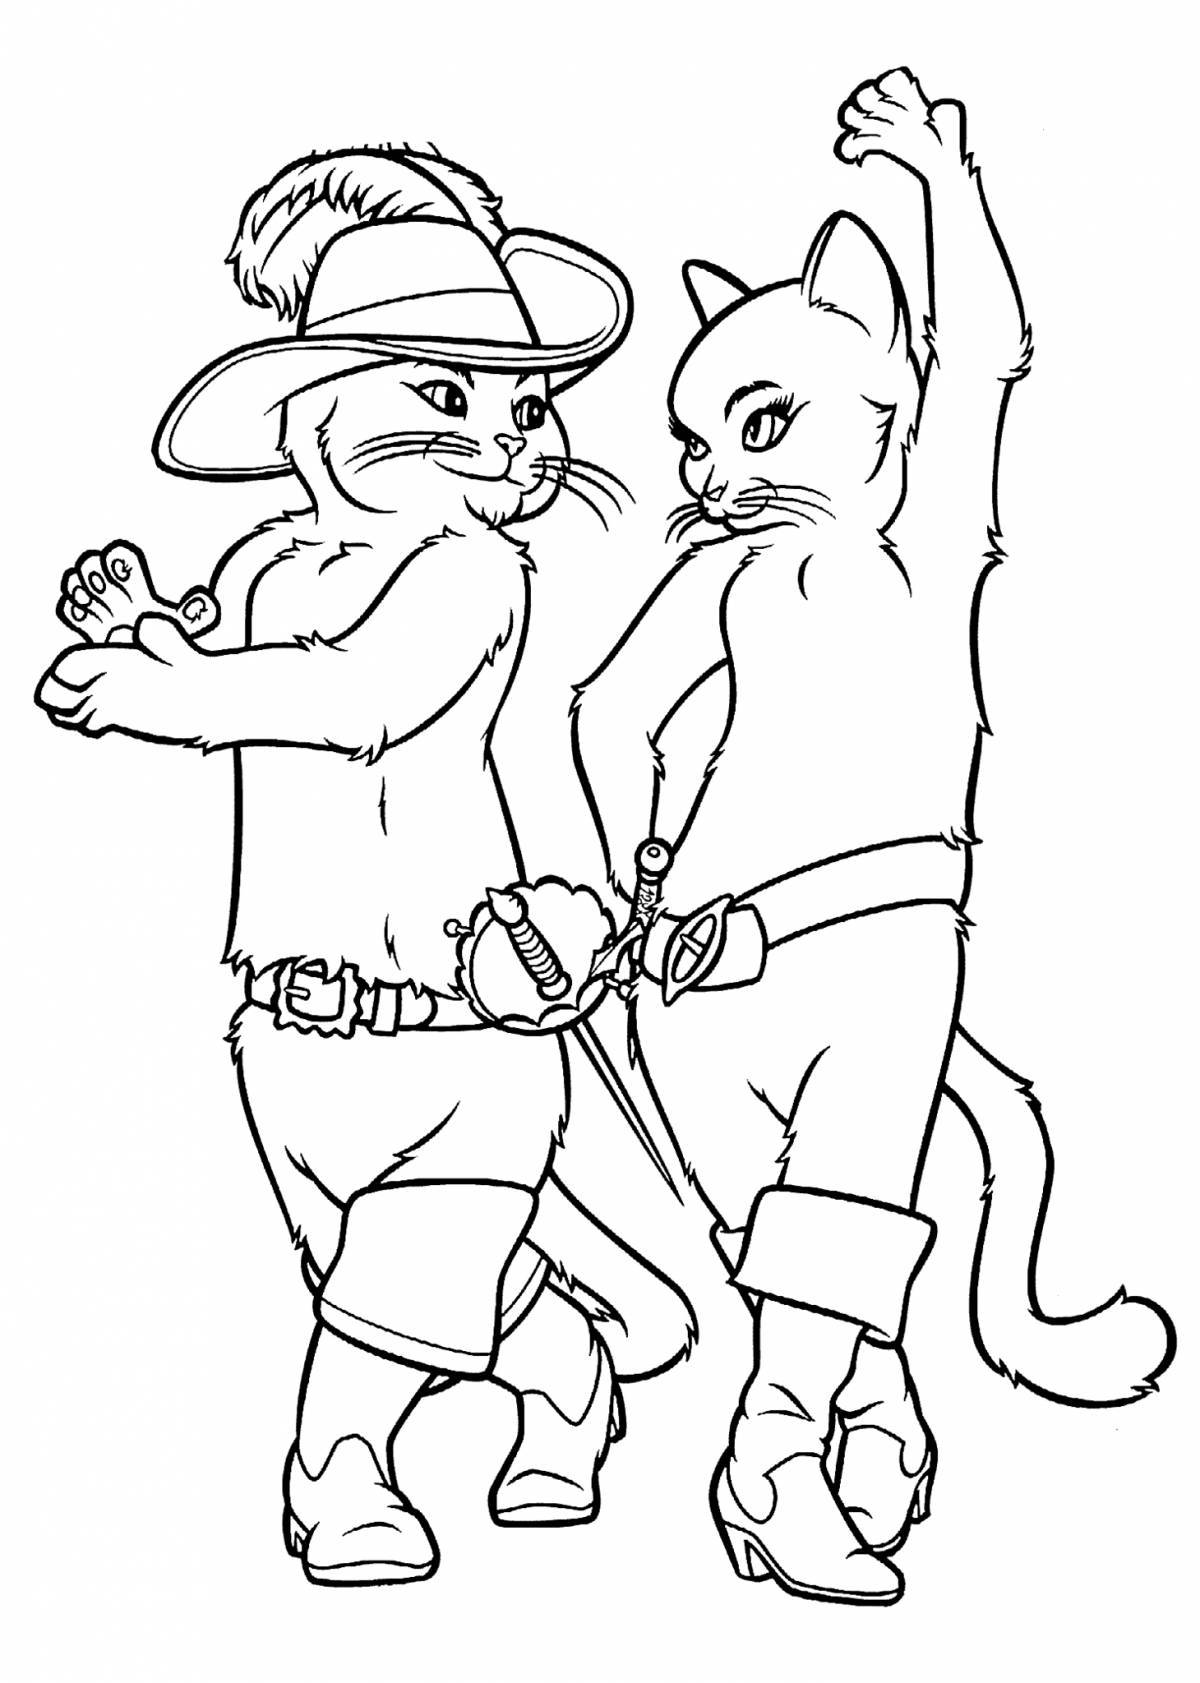 Coloring page adorable puss in boots for kids